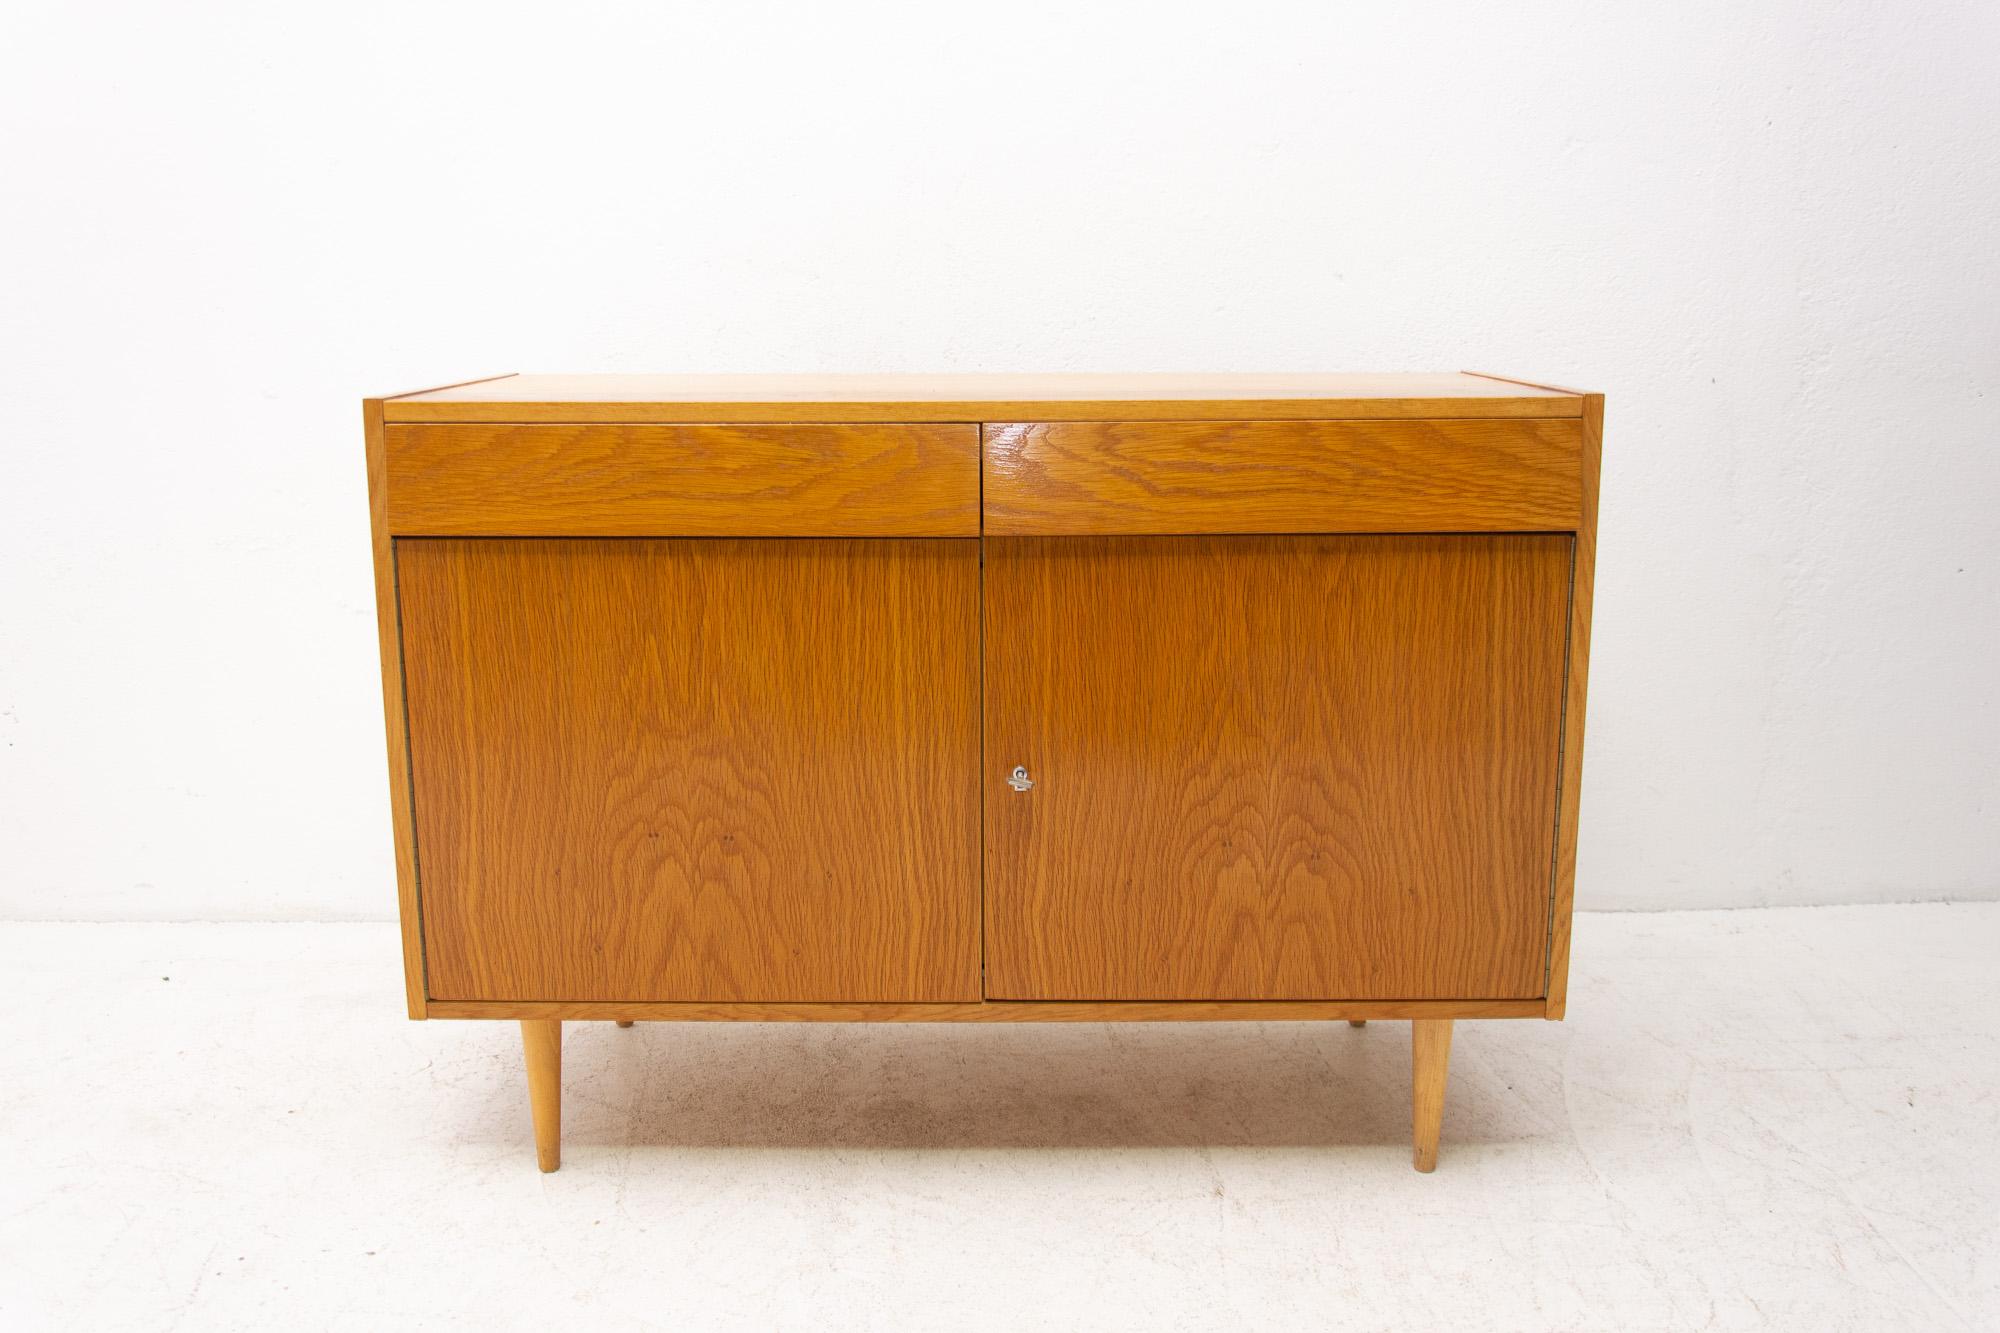 Midcentury chest of drawers, made in the former Czechoslovakia in the 1960s. This model is associated with the world-famous EXPO 58 in Brussels. It´s made of beech wood and plywood. The chest is in very good vintage condition, shows slight signs of